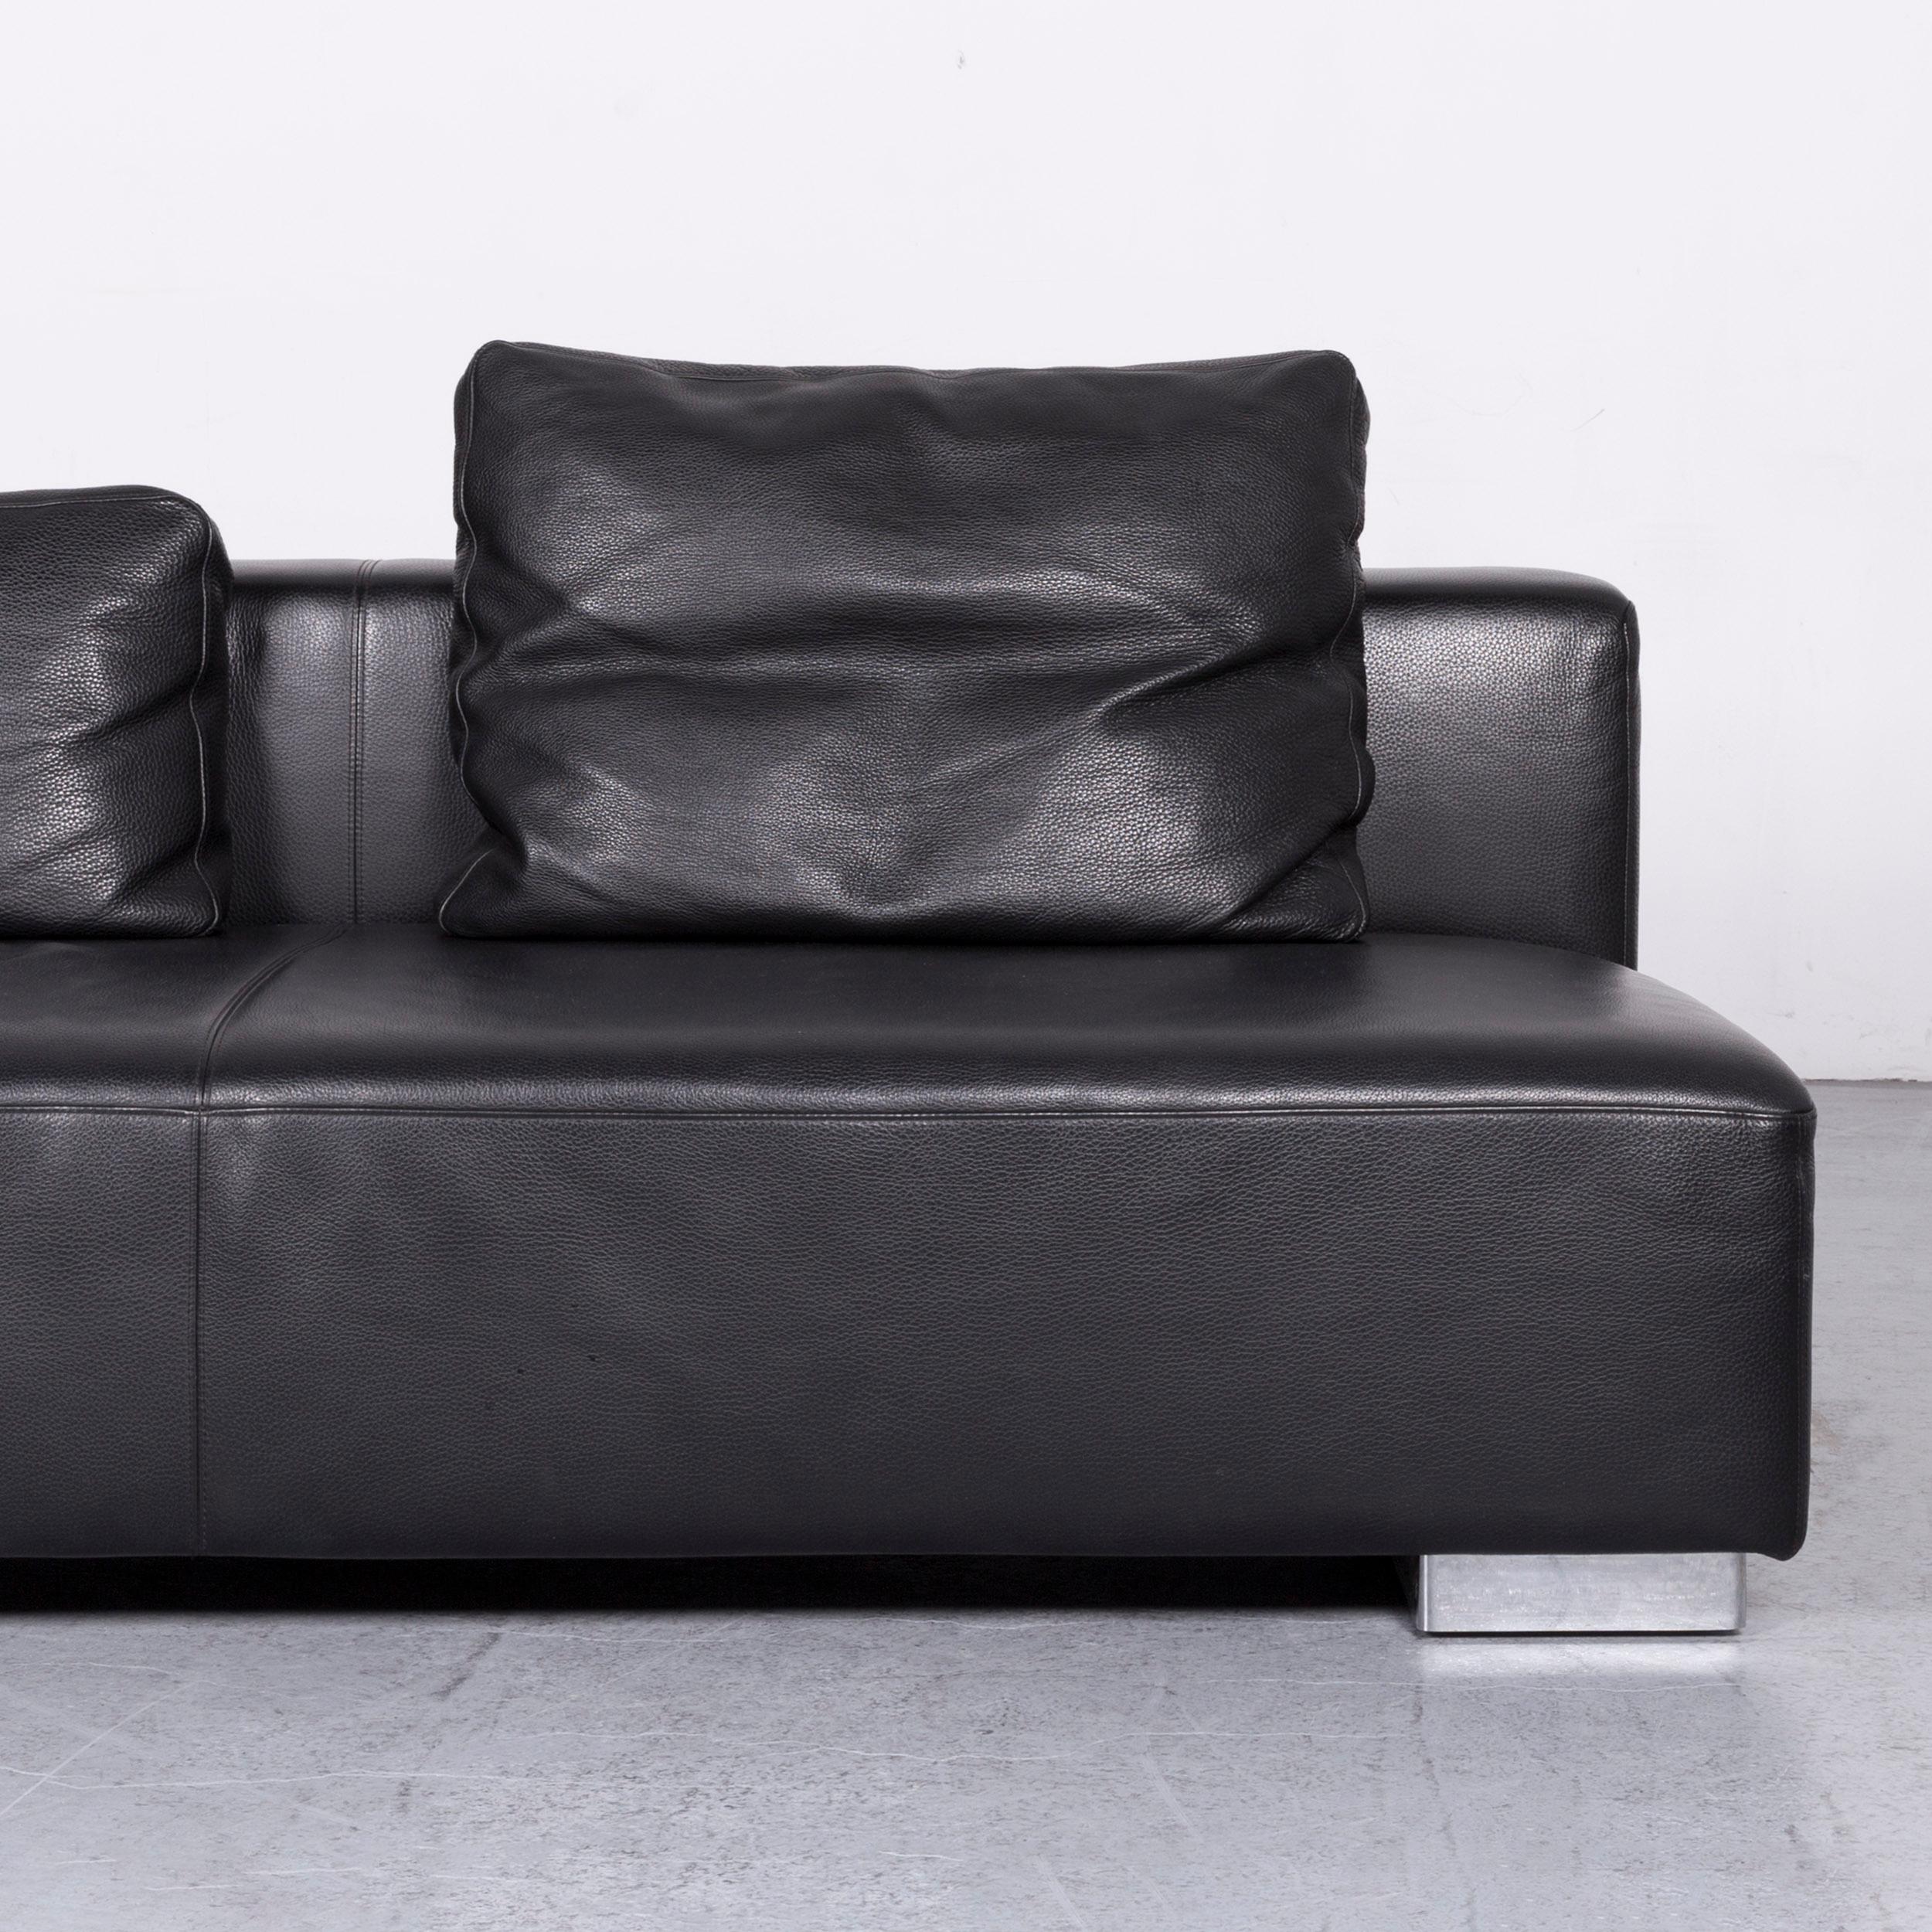 Contemporary Brühl & Sippold Designer Sofa Set Leather Black Two-Seat Couch Modern For Sale